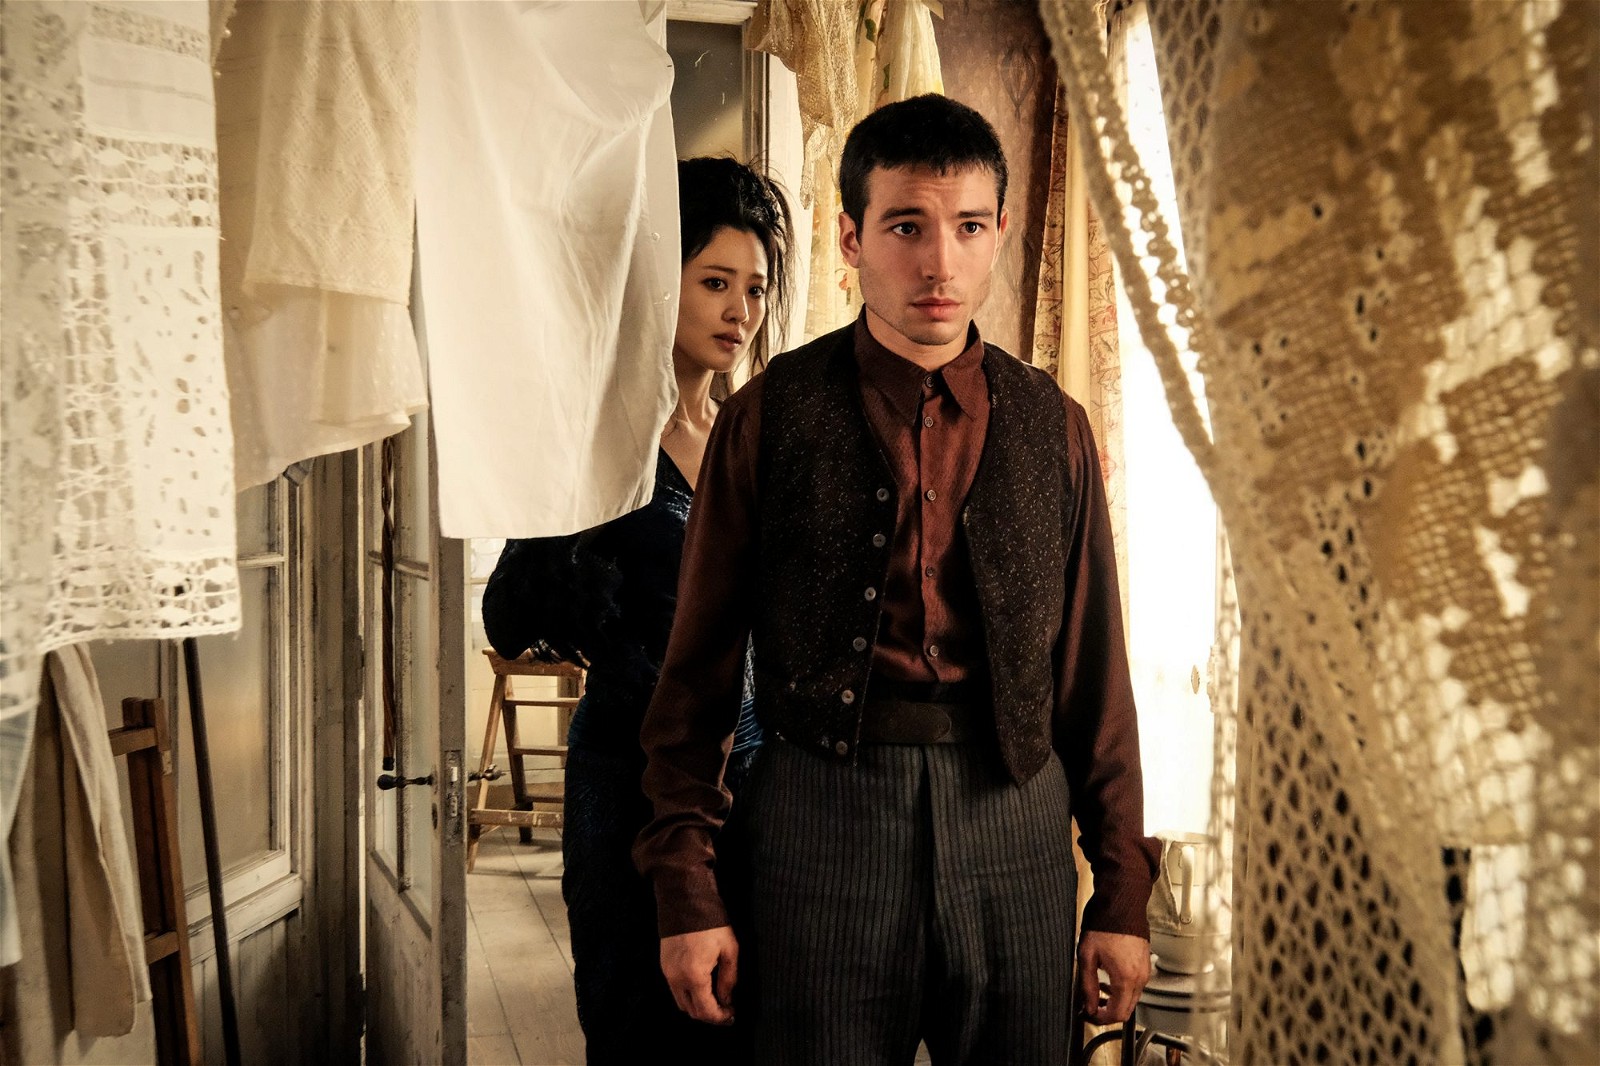 Ezra Miller is also known for playing Credence in the Fantastic Beasts franchise.